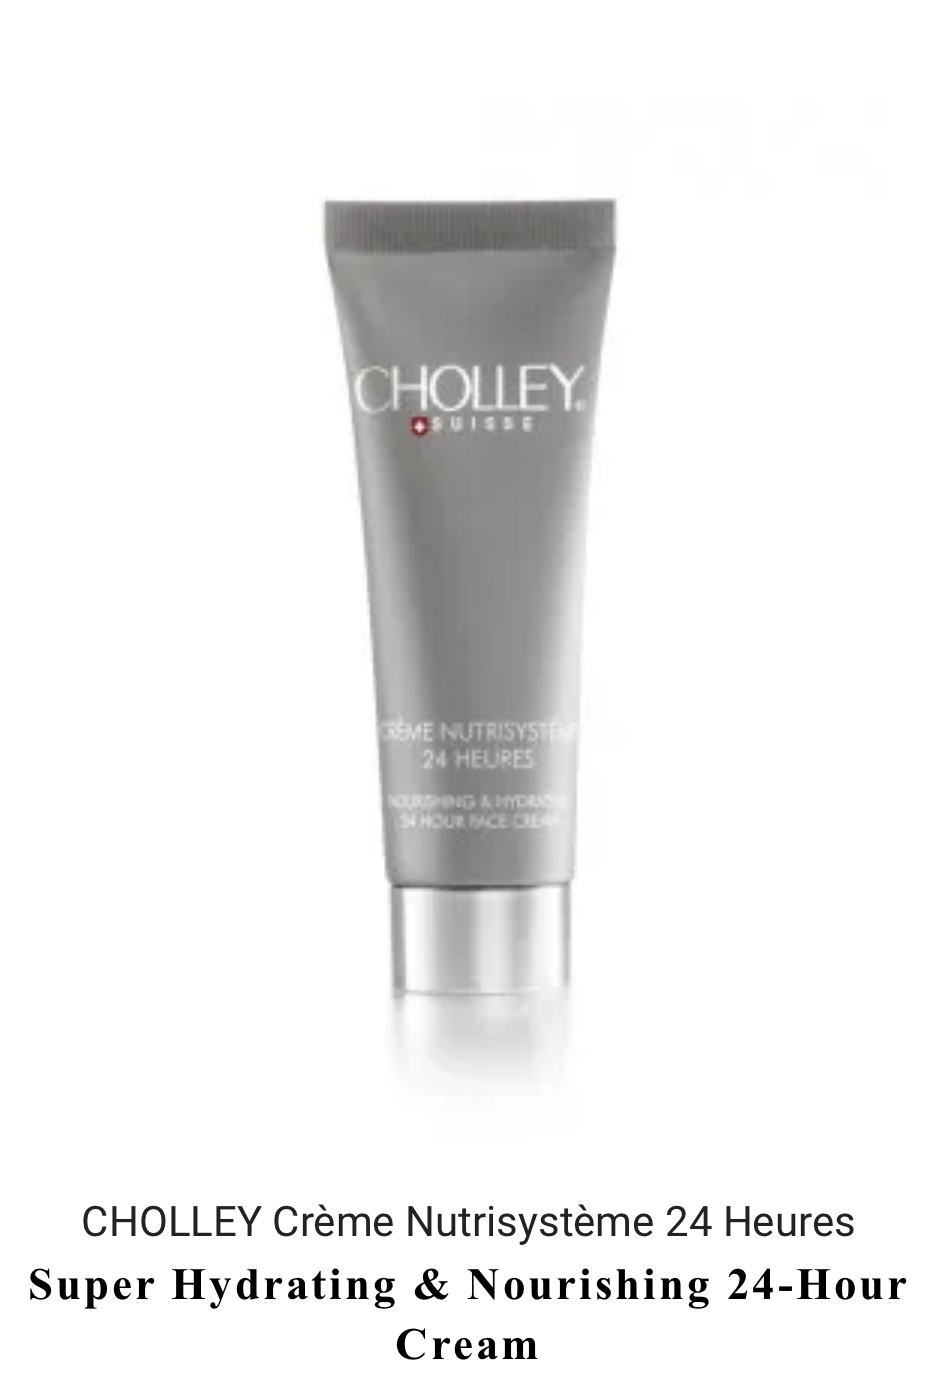 Cholley Creme Nurtrisysteme 24 Heures 50ml